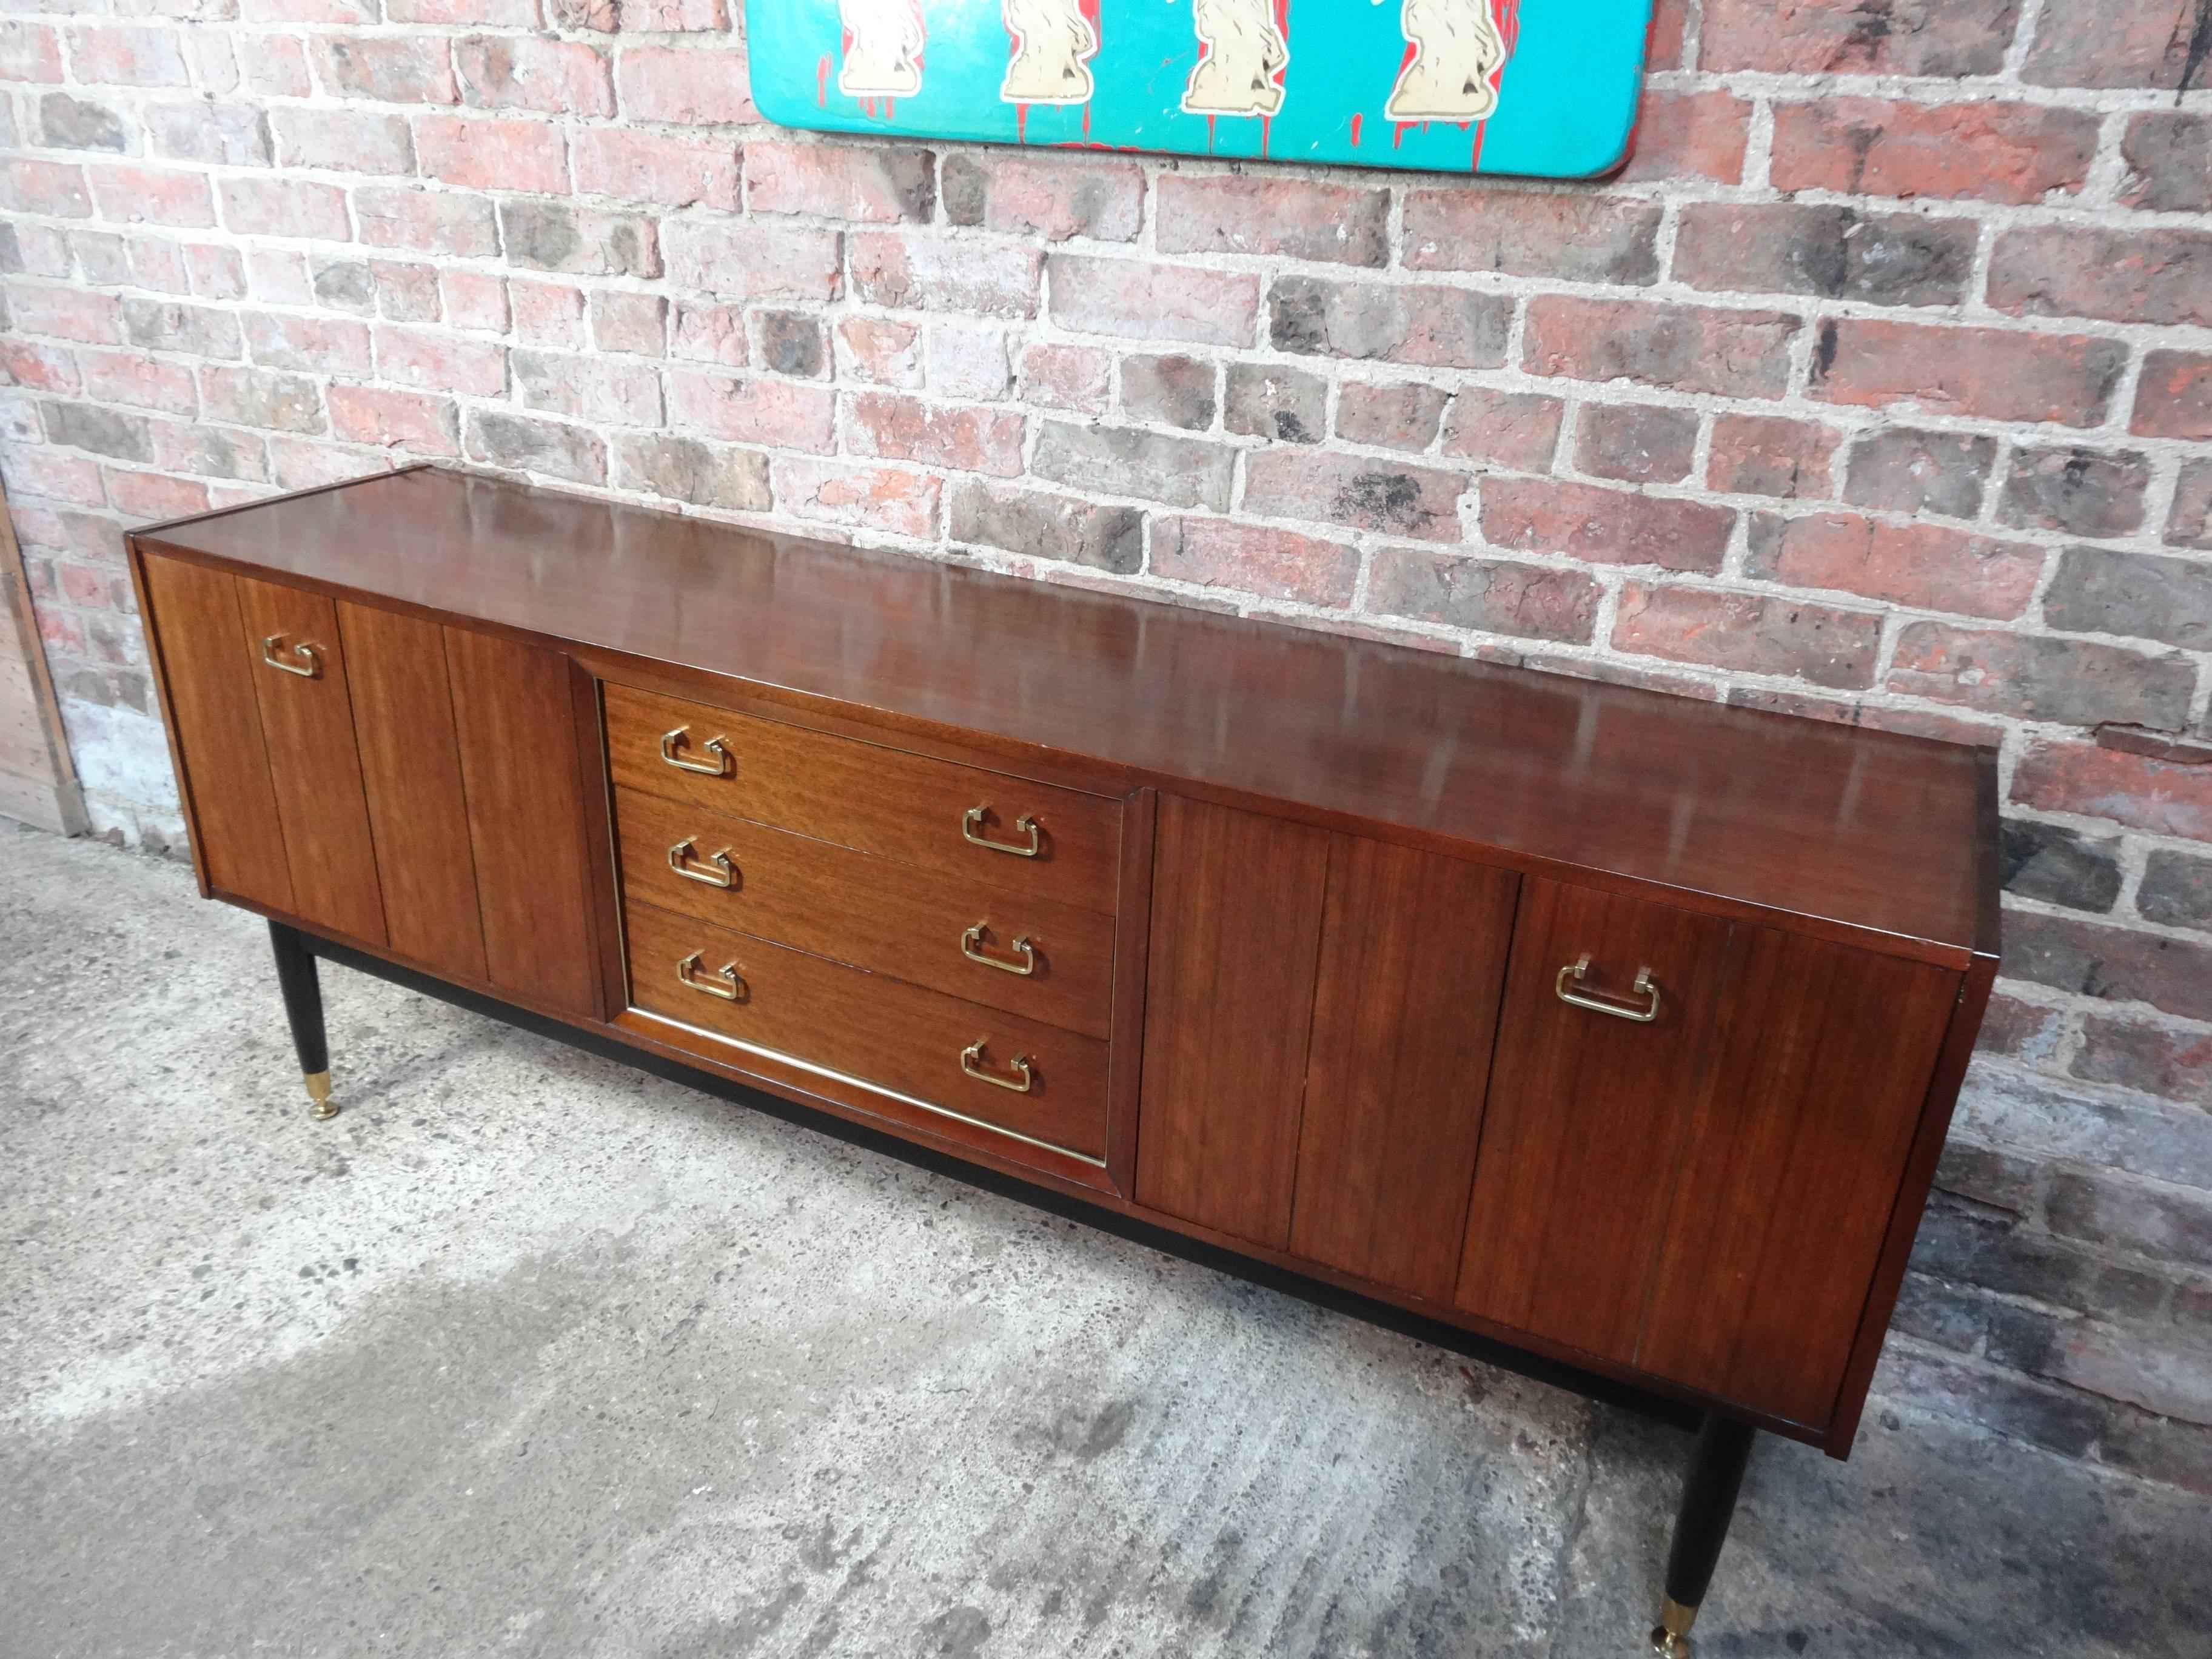 20th Century Sought after Vintage Retro E Gomme Teak Sideboard with Brass Handles from 1950s